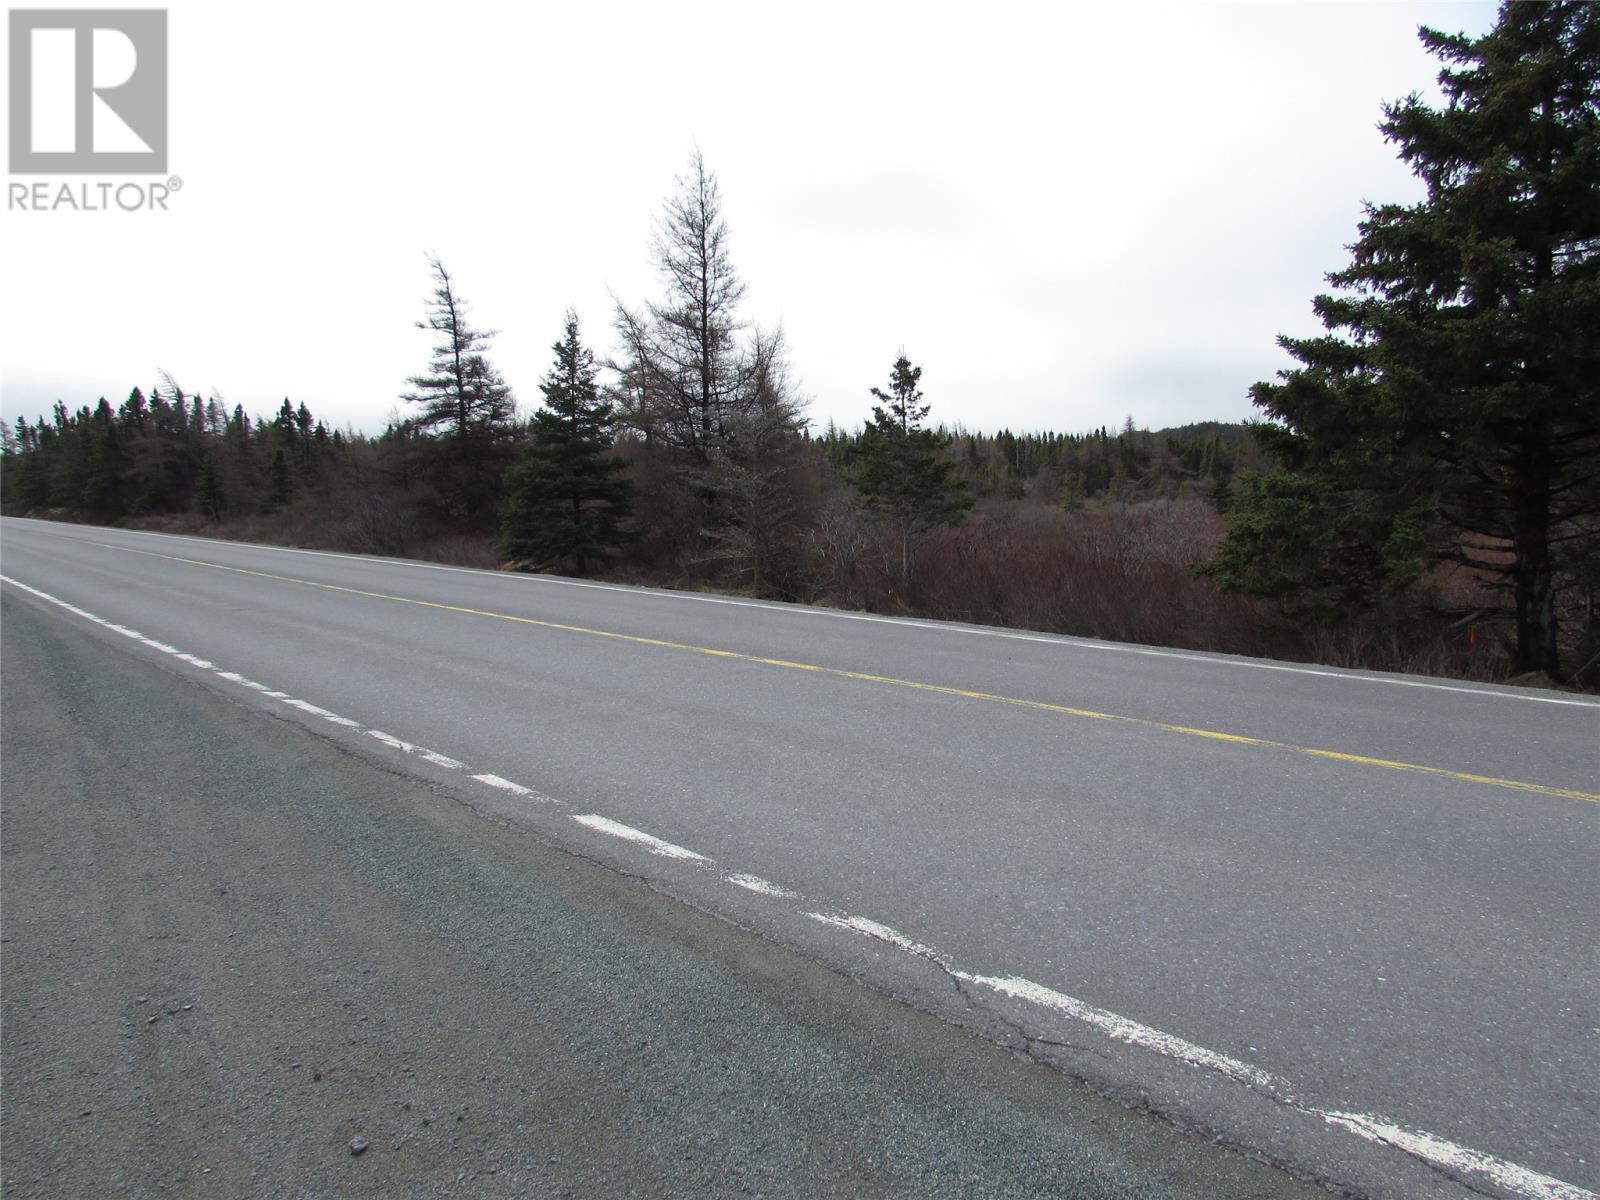 97-105 Conception Bay Highway located in Conception Hr., Newfoundland and Labrador